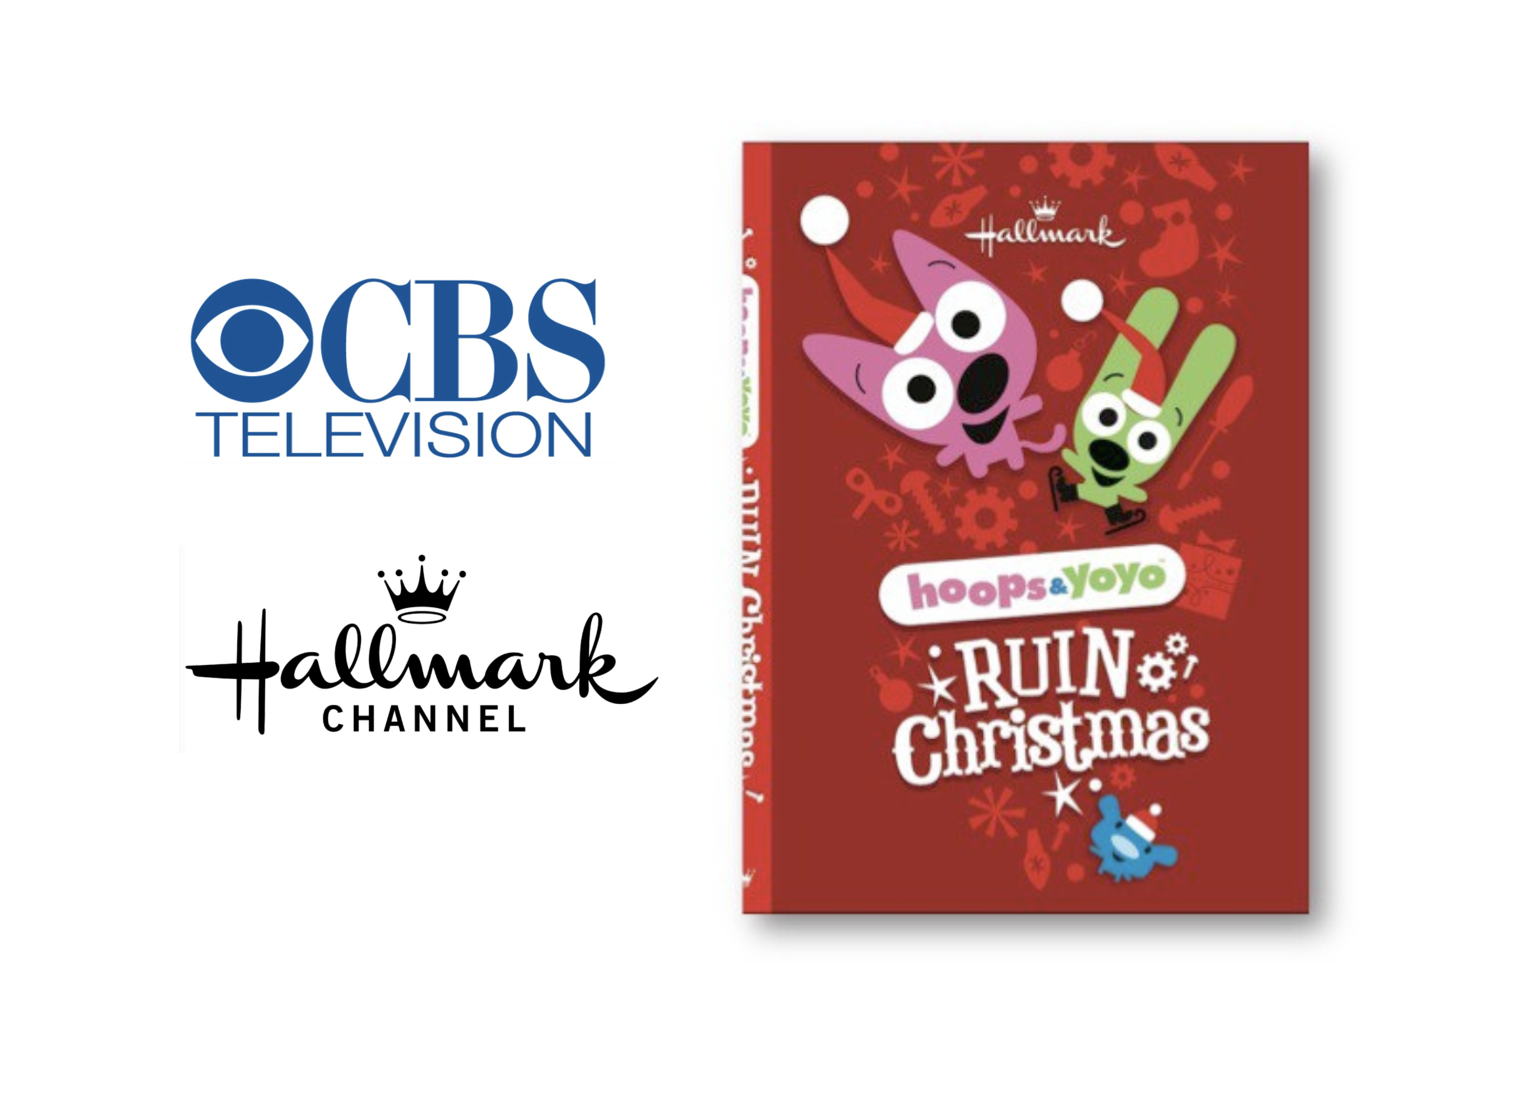   A 30 minute special in 2D animation that aired on CBS and the Hallmark Channel on Black Friday. This was optioned by CBS and ran for three years in a Black Friday block.  